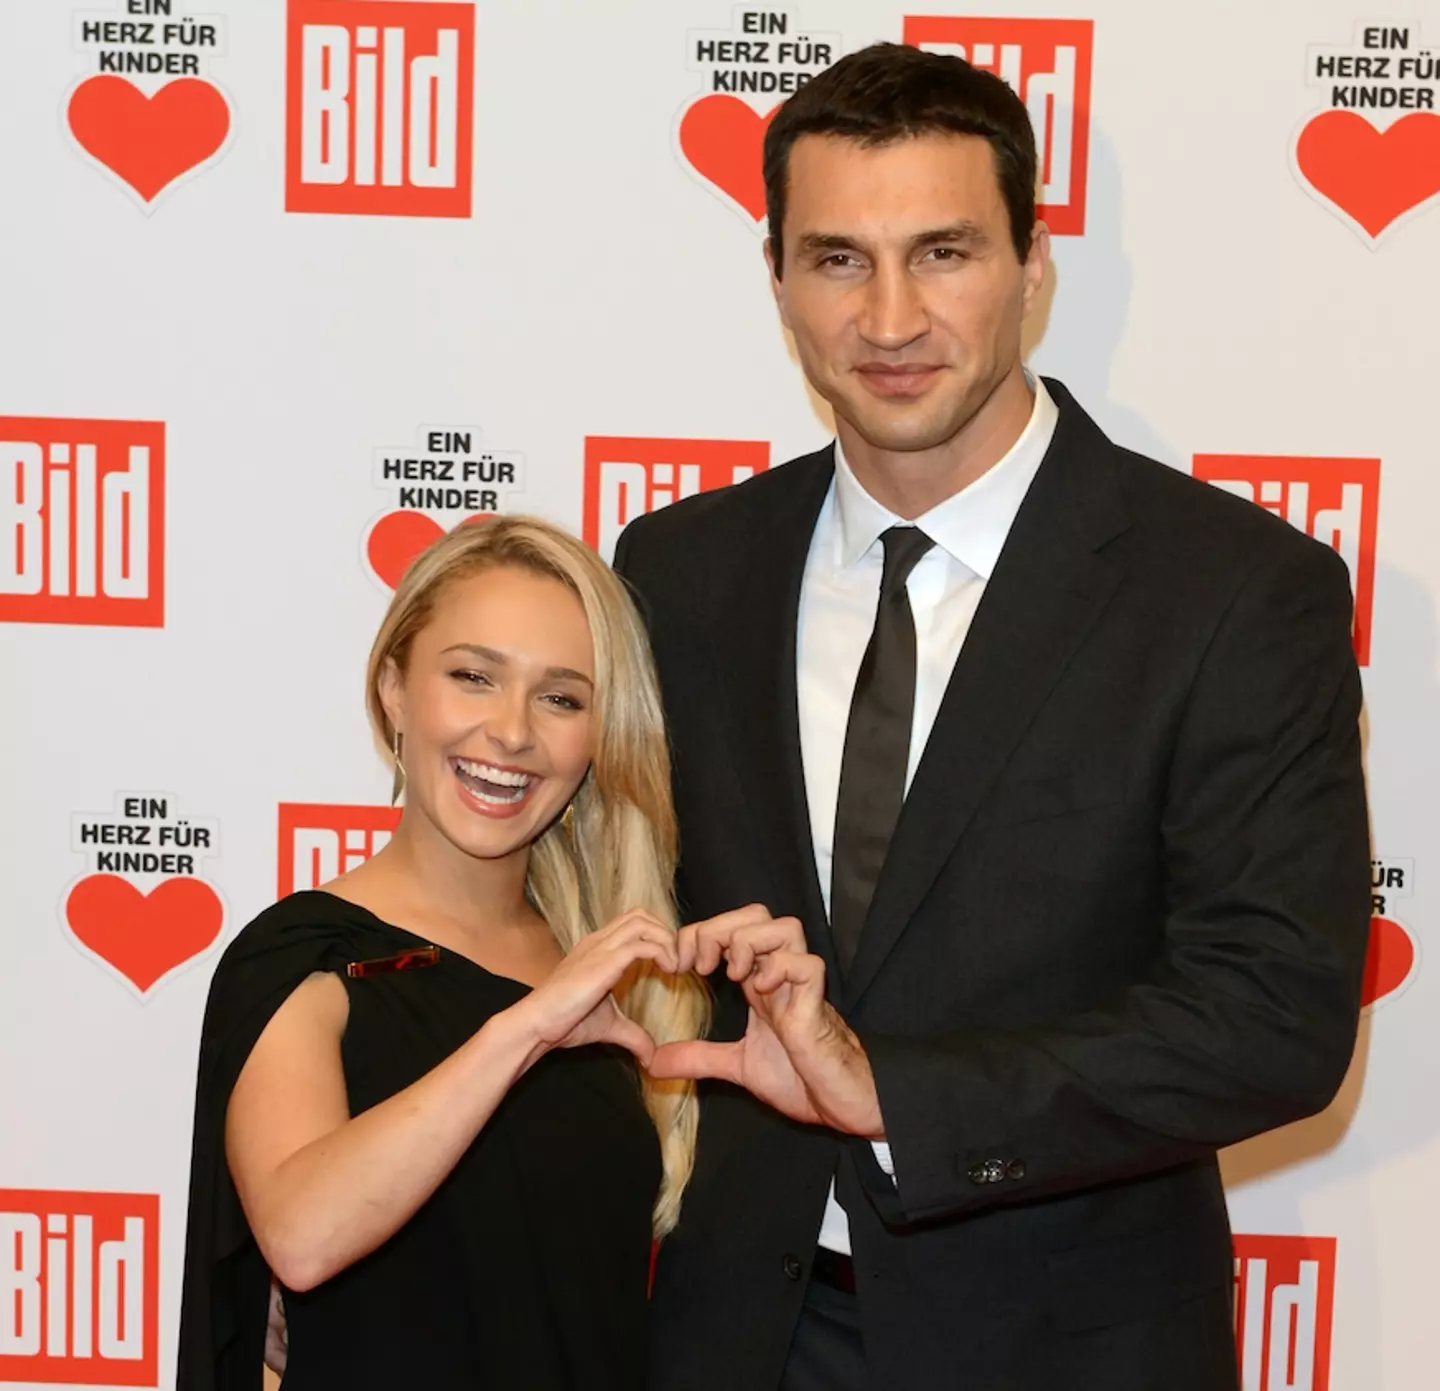 Panettiere shares a daughter with Wladimir Klitschko.